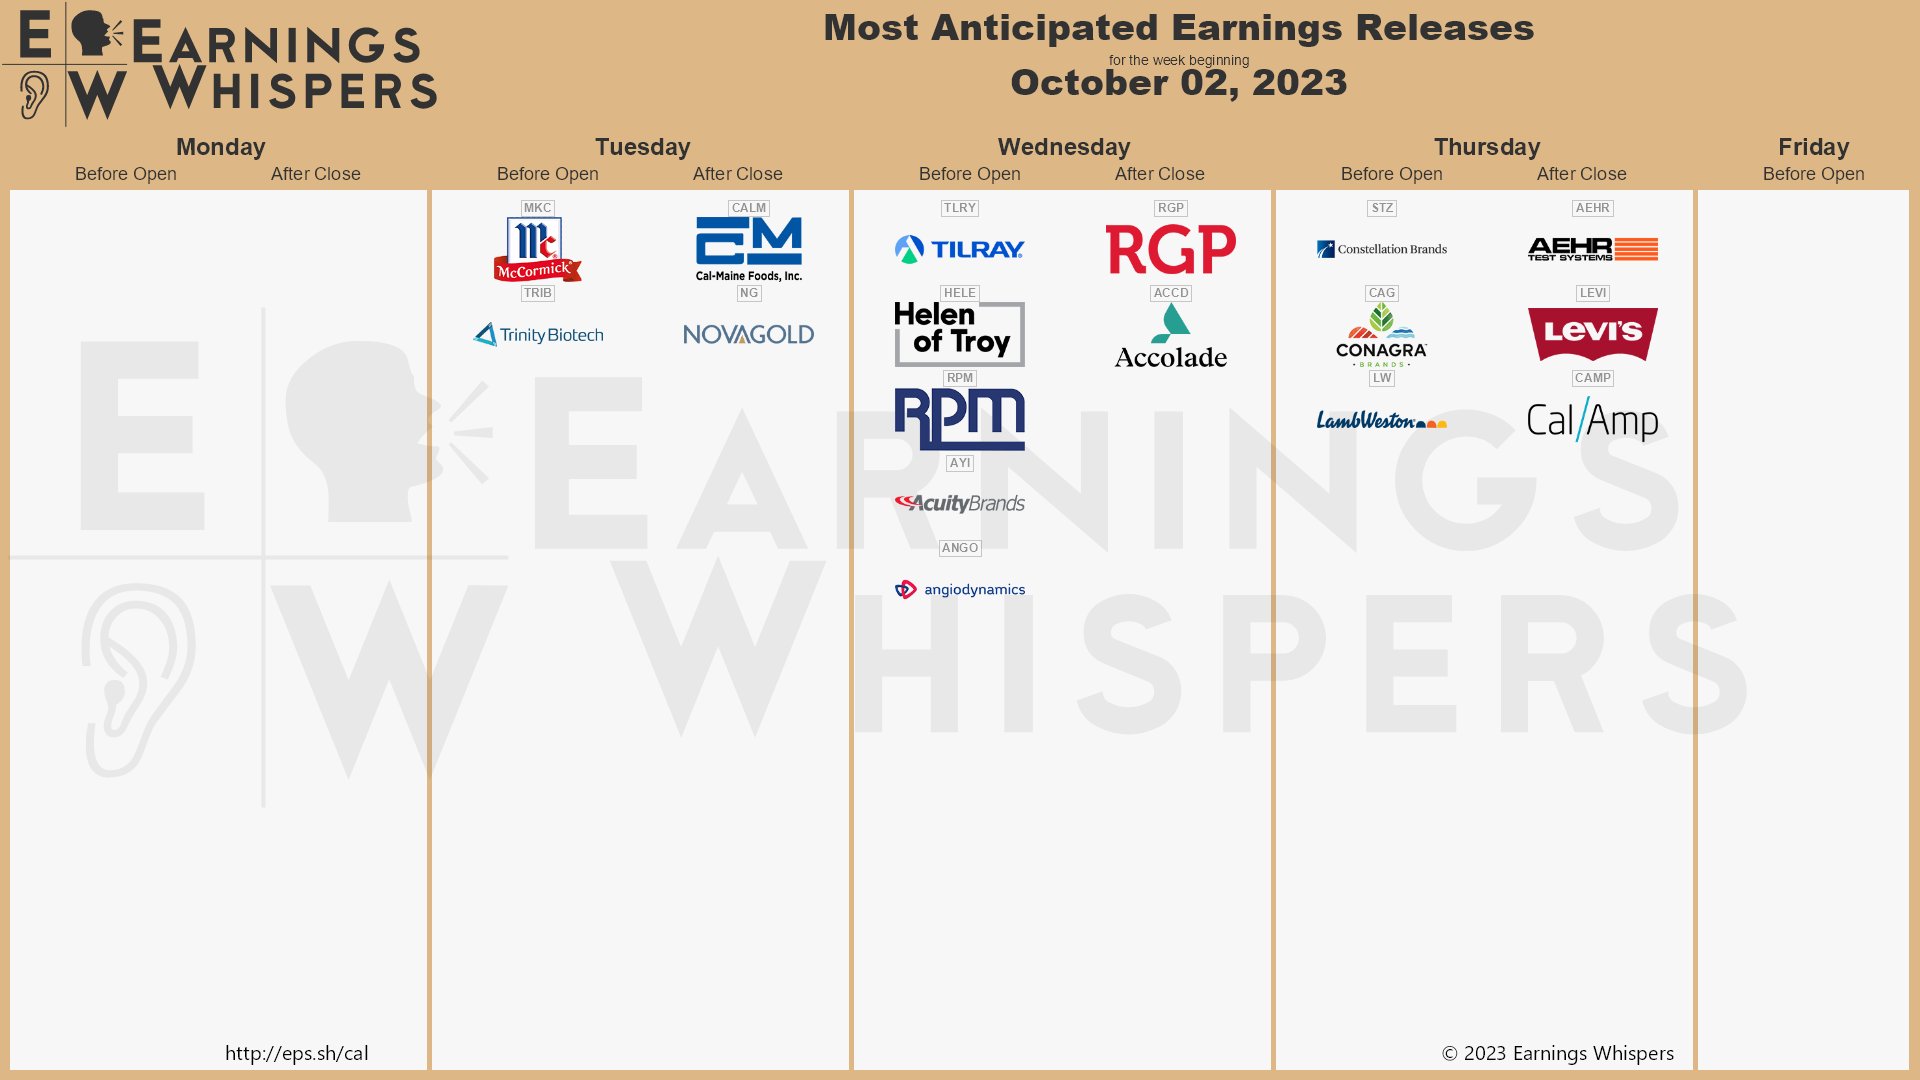 The most anticipated earnings releases scheduled for the week are Tilray #TLRY, Constellation Brands #STZ, McCormick & Company #MKC, Lamb Weston #LW, Trinity Biotech #TRIB, Aehr Test Systems #AEHR, Conagra Brands #CAG, Helen of Troy $HELE, Levi Strauss #LEVI, and RPM International #RPM. 